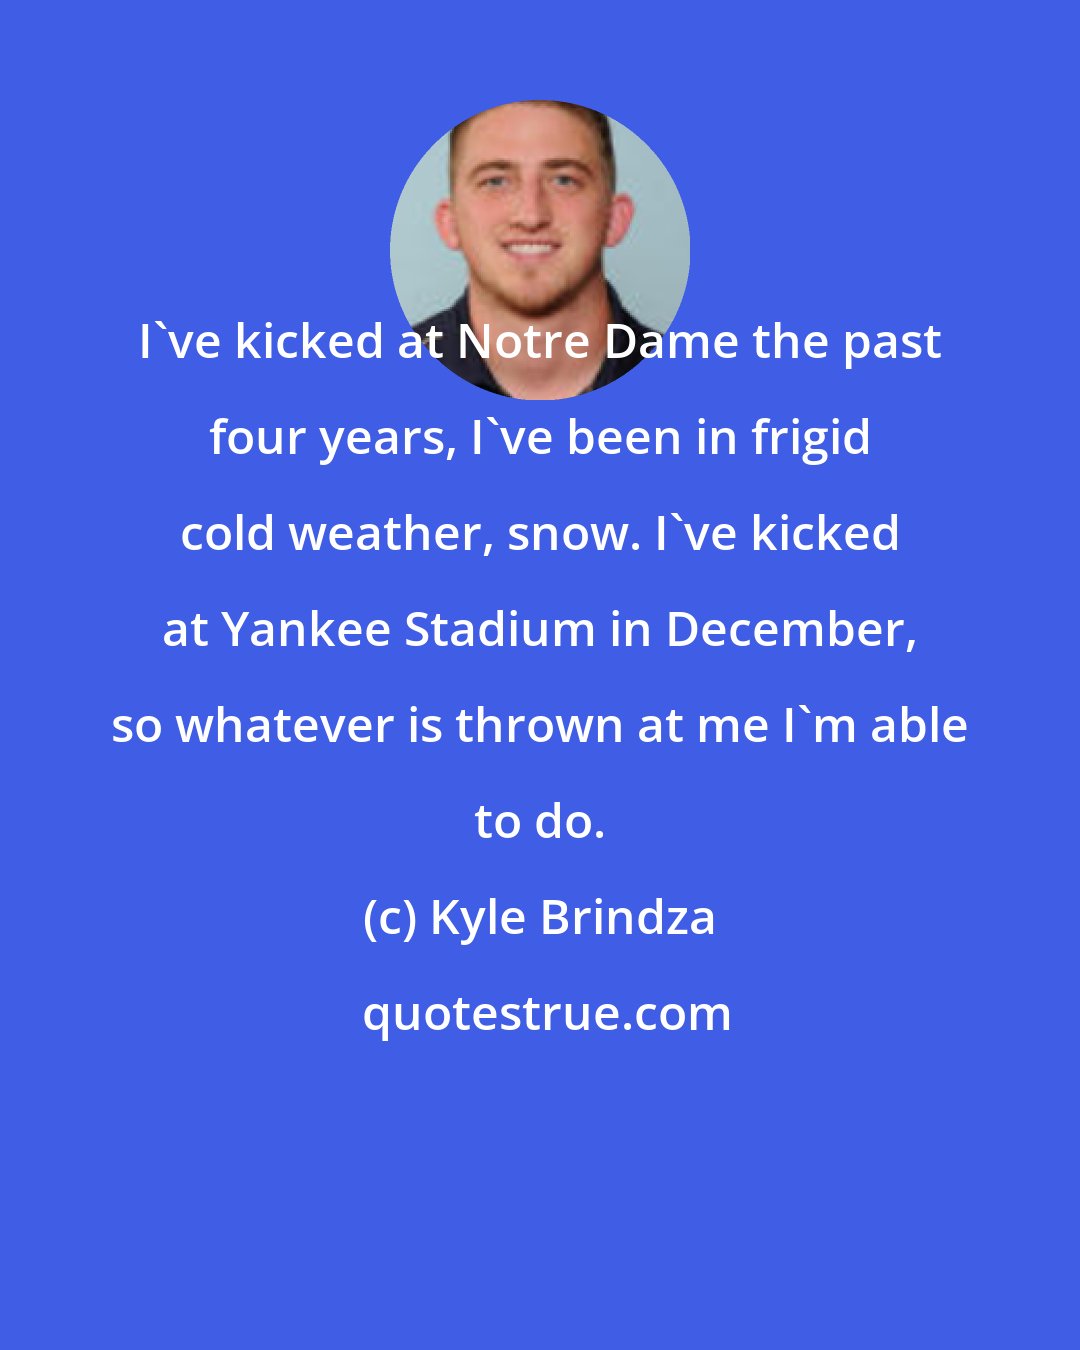 Kyle Brindza: I've kicked at Notre Dame the past four years, I've been in frigid cold weather, snow. I've kicked at Yankee Stadium in December, so whatever is thrown at me I'm able to do.